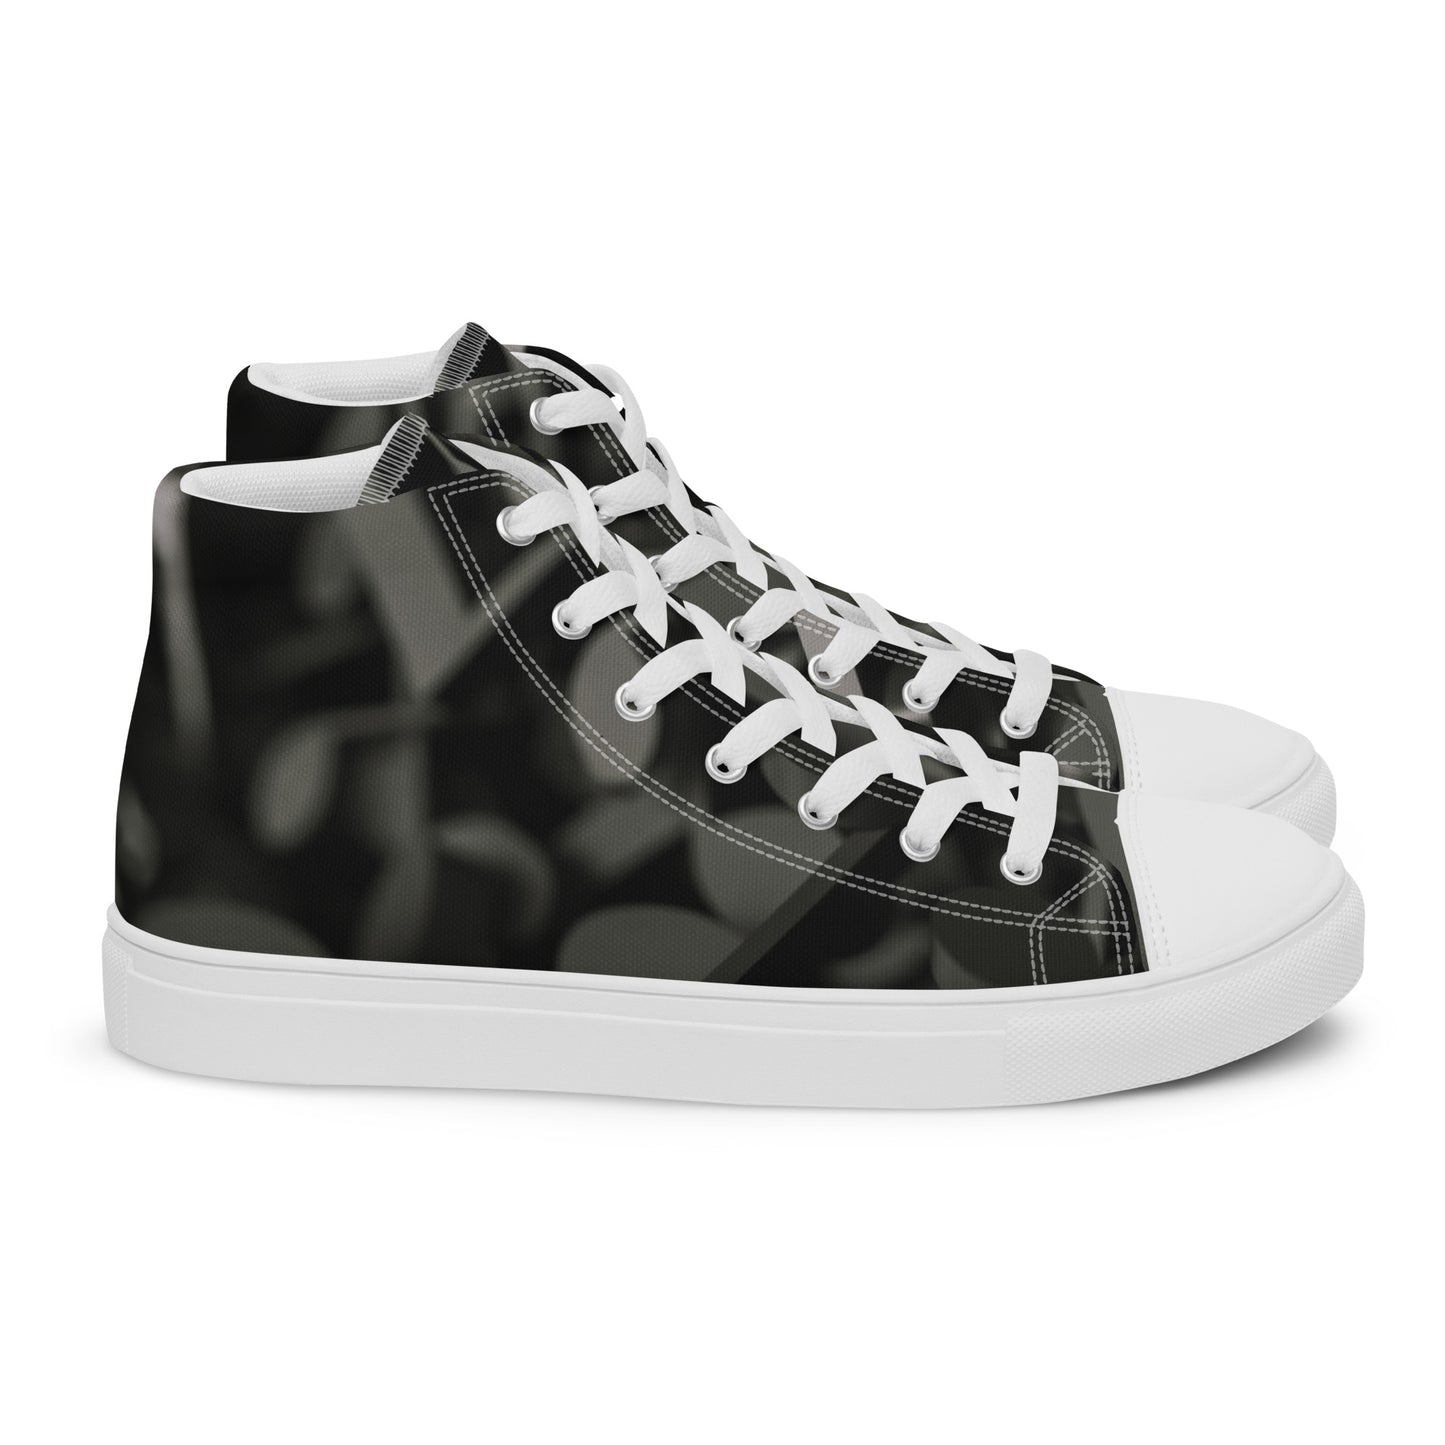 Musicale high top canvas shoes